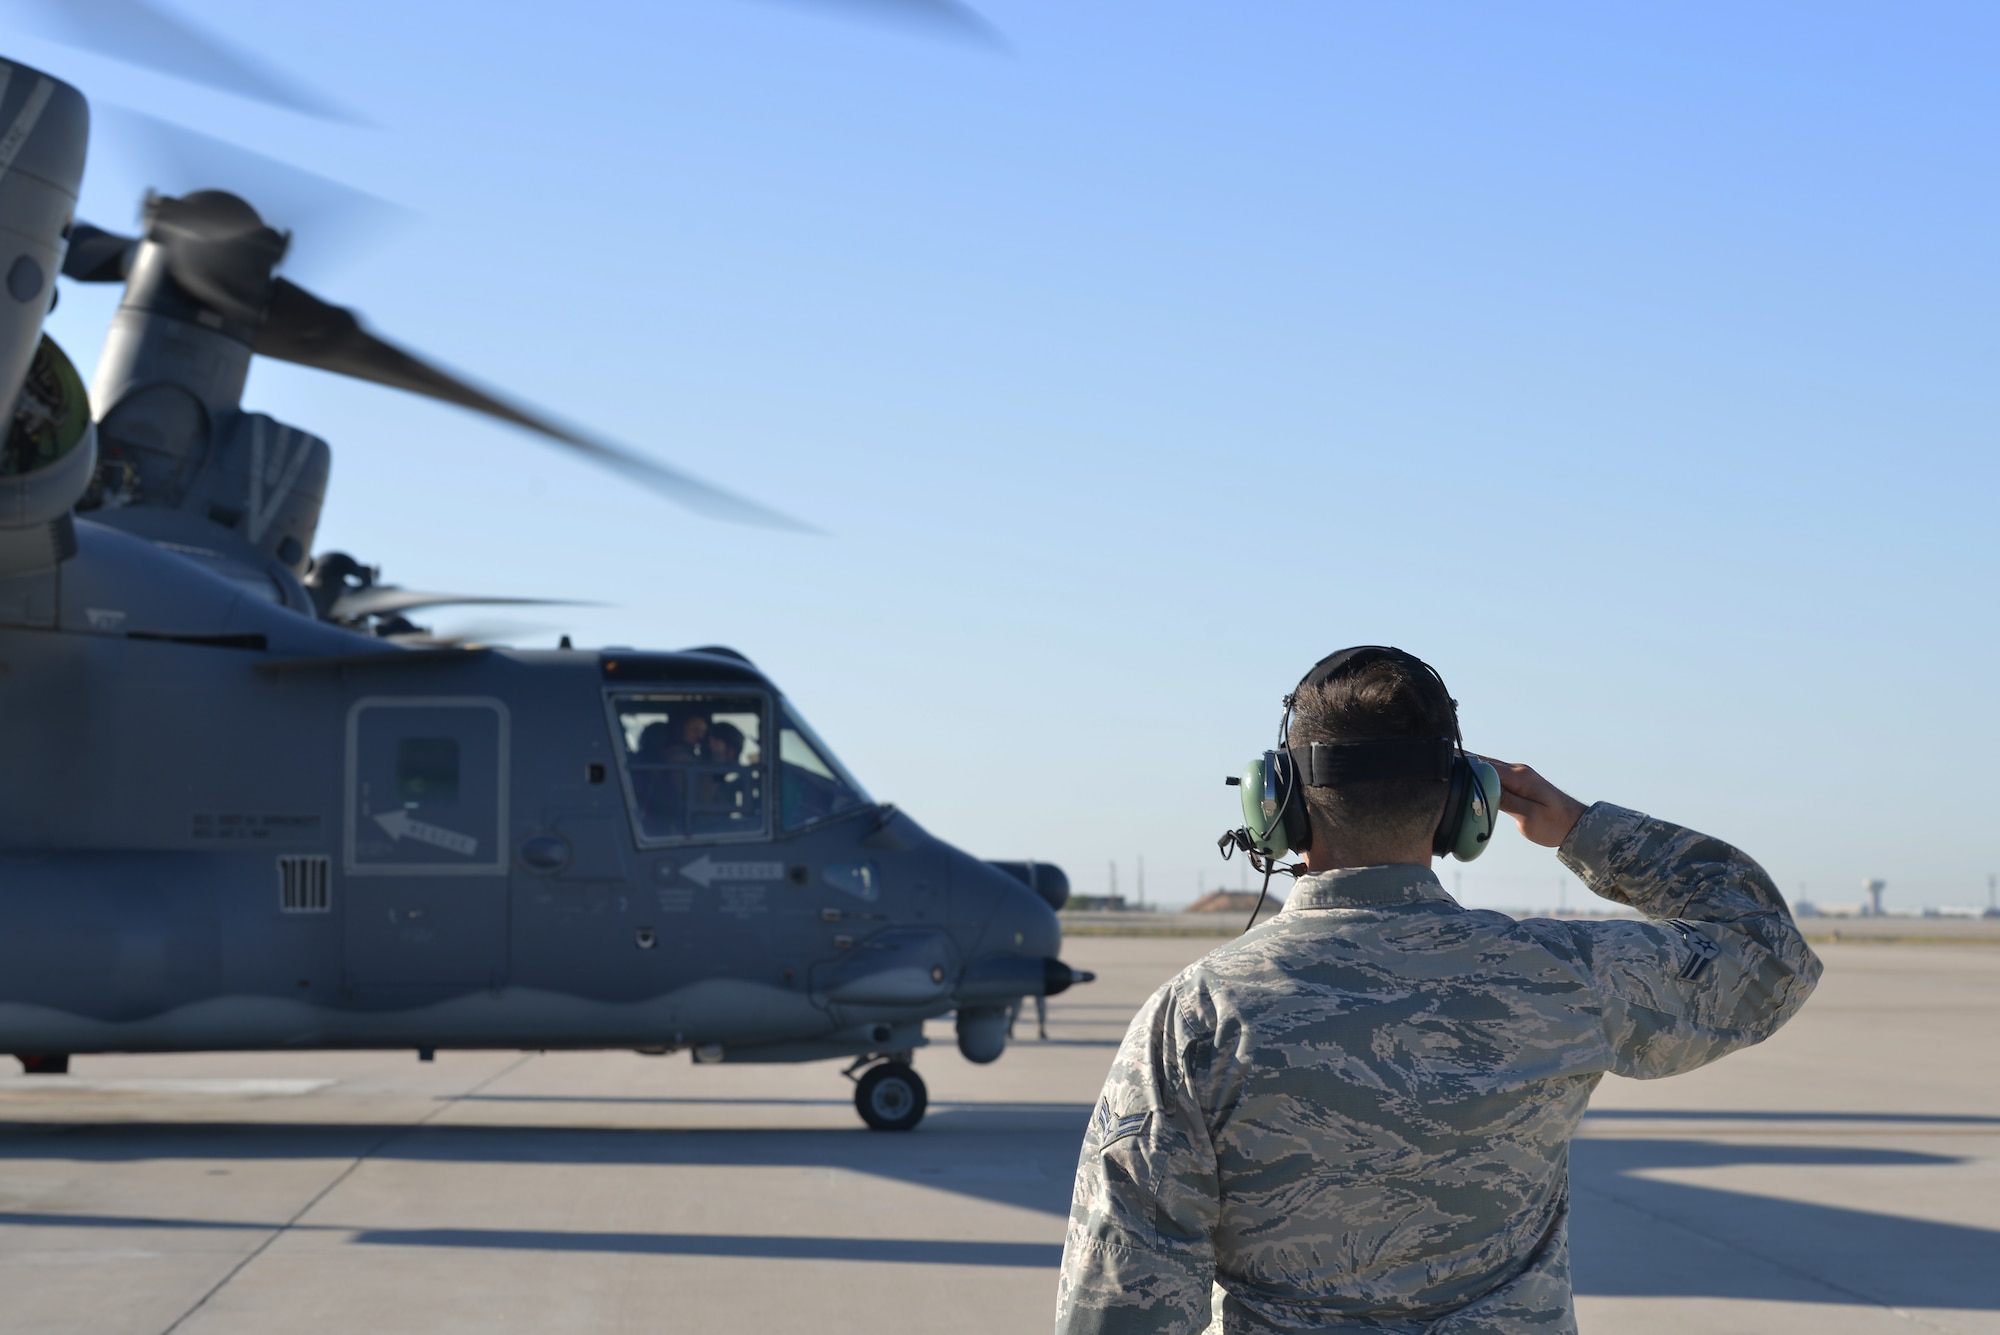 U.S. Air Force Airman 1st Class Ethan McCausland, 71st Aircraft Maintenance Unit CV-22 Osprey crew chief, salutes the aircrew of a CV-22 Osprey, at Kirtland Air Force Base, N.M., Oct. 7, 2019. Over the last fiscal year, the AMU hit their 1,500 flight hour goal for the CV-22 Osprey. The mission of the 71st AMU is to provide mission ready CV-22 Ospreys for the 71st Special Operations Squadron. (U.S. Air Force photo by Staff Sgt. Dylan Nuckolls)